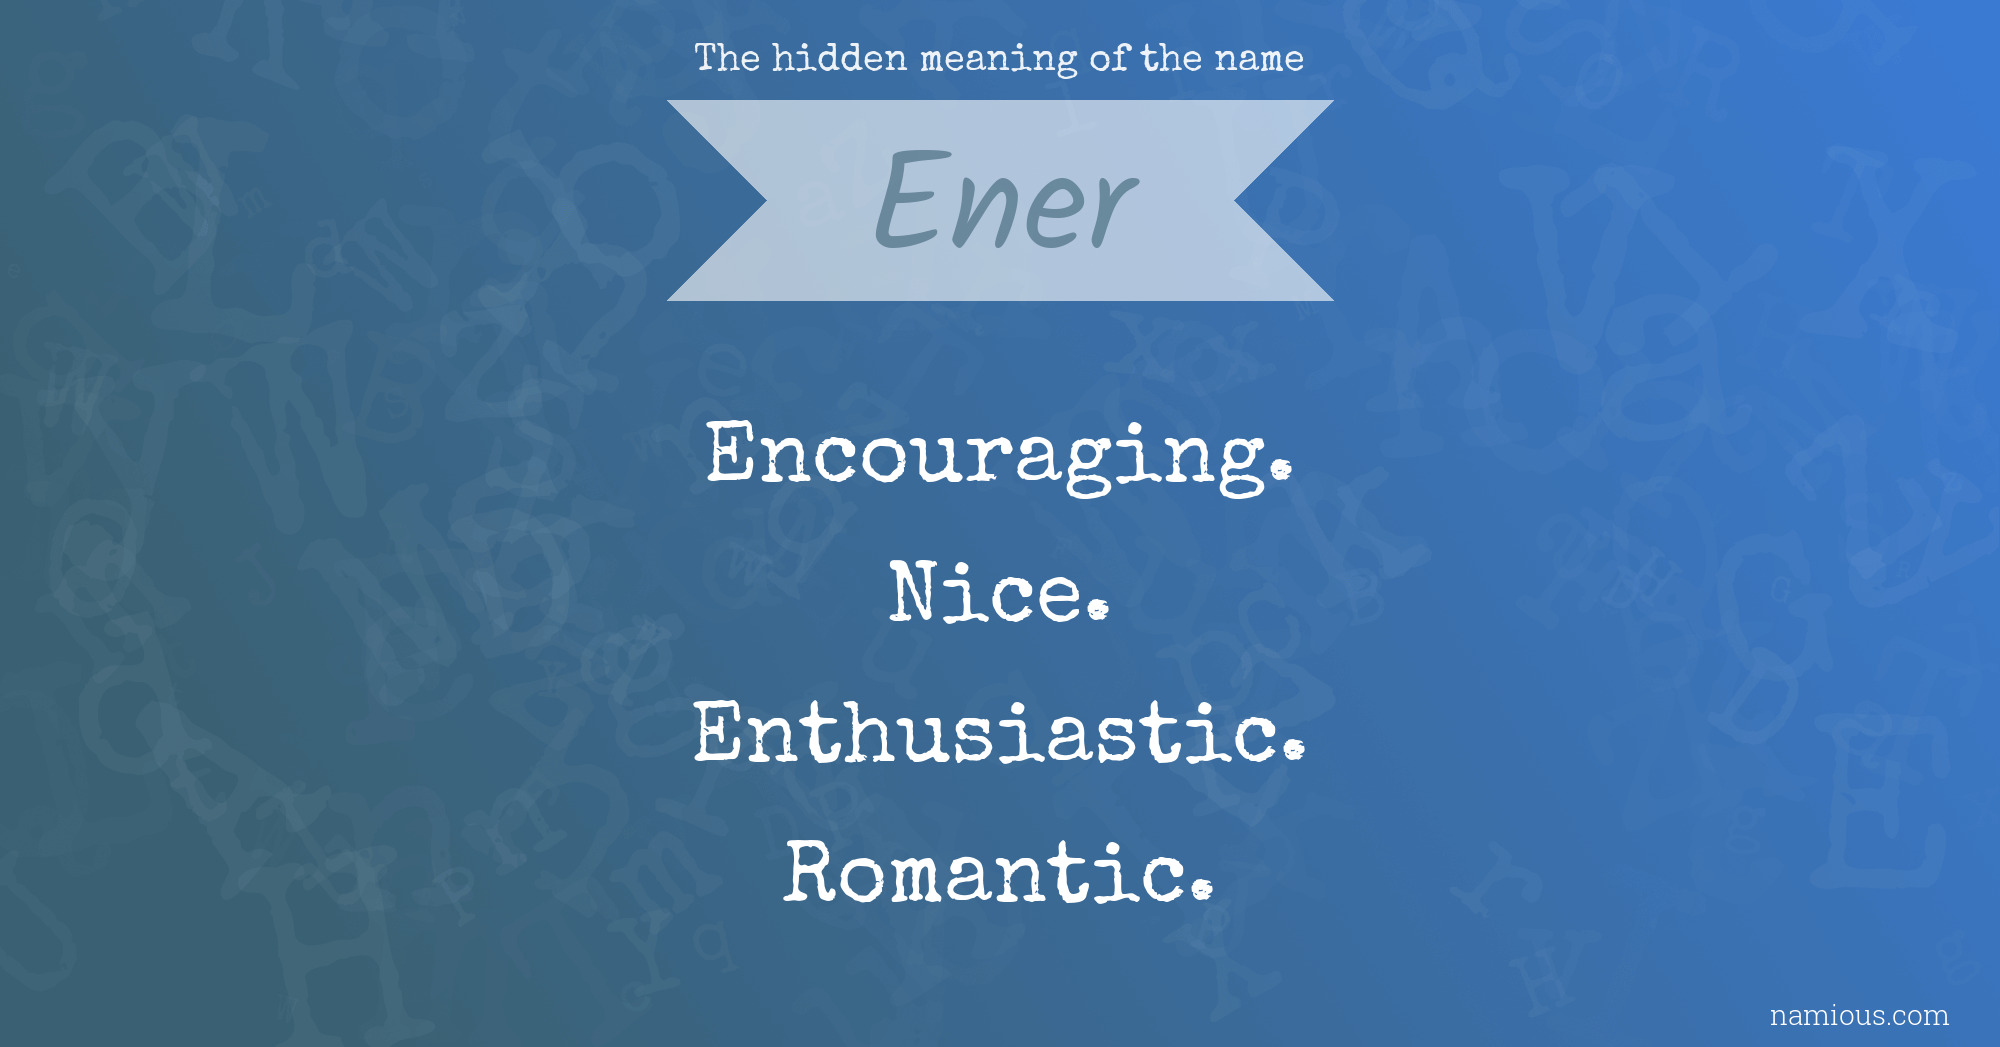 The hidden meaning of the name Ener